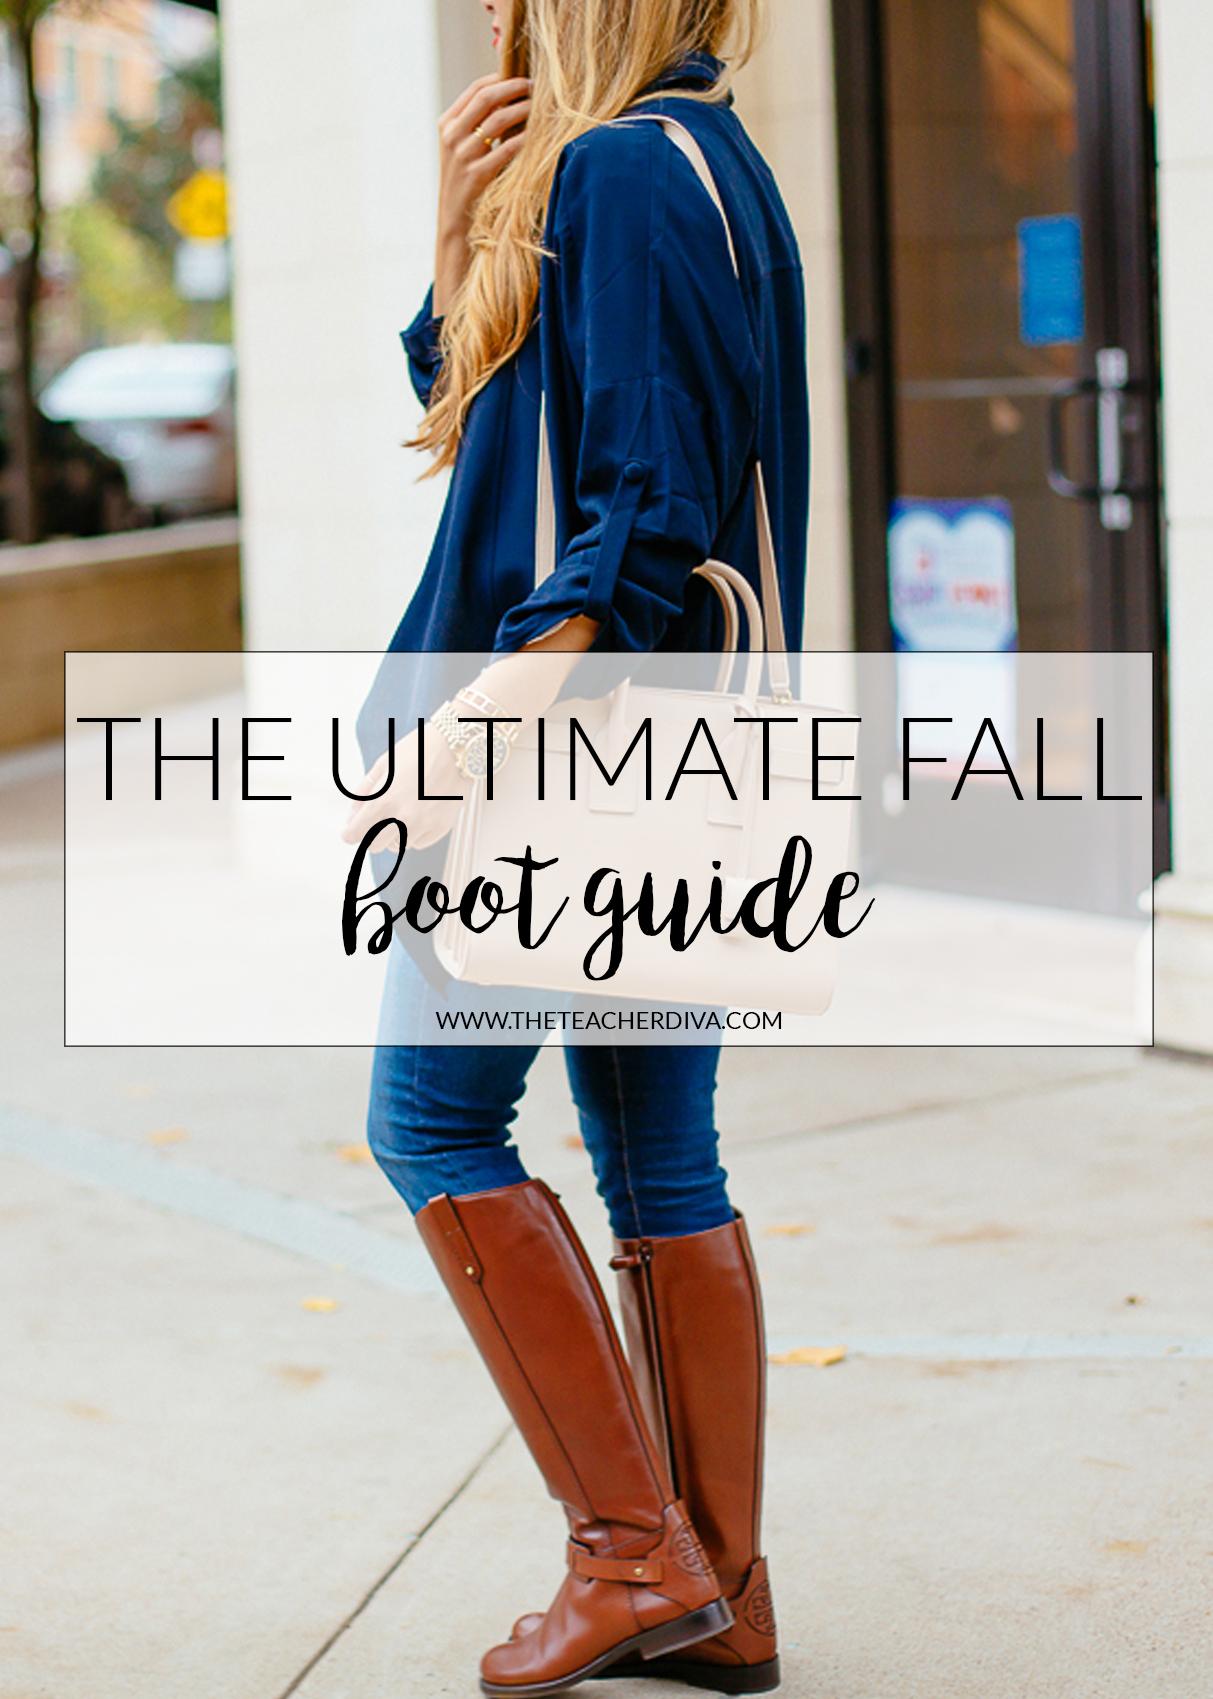 10 Riding Boot Outfit Ideas For Fall - the Flexman Flat